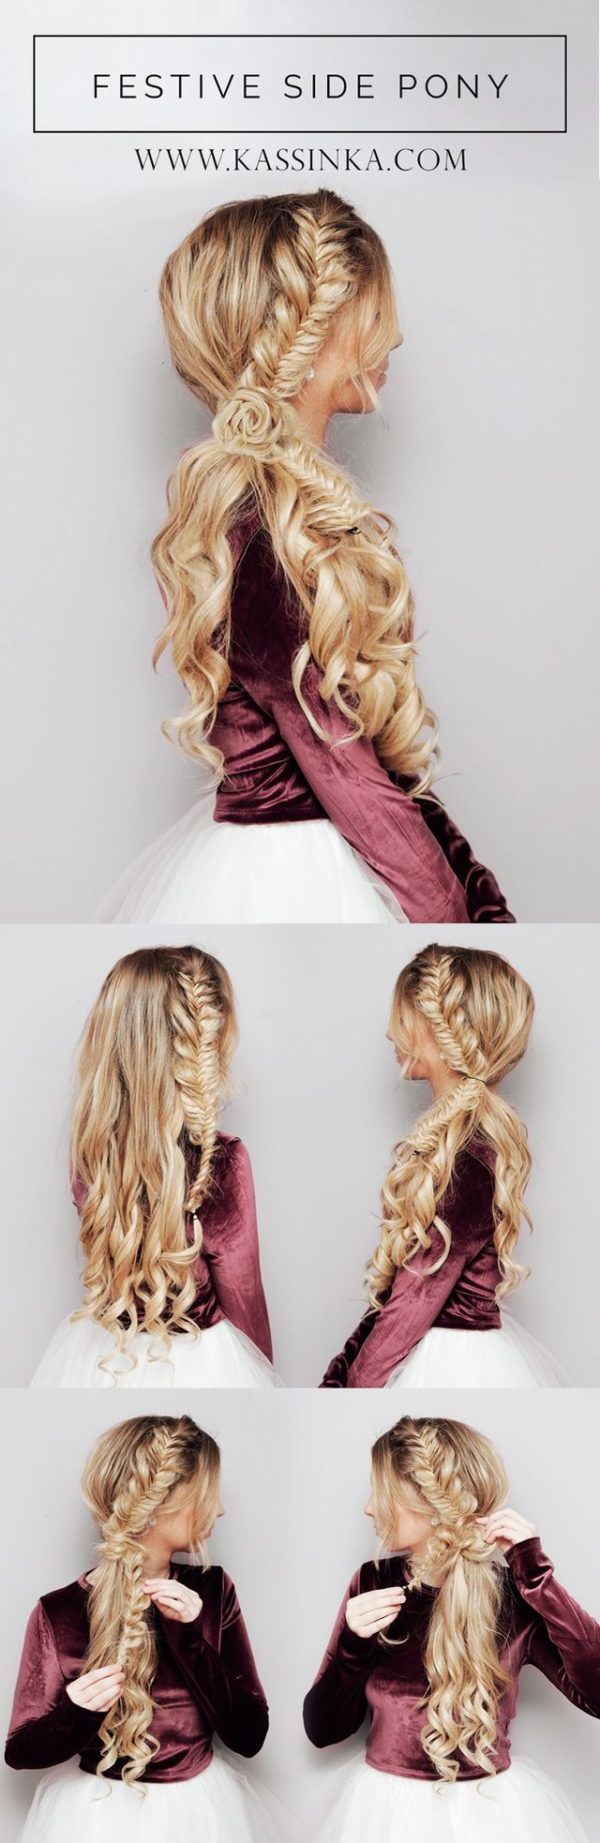 Do An Easy Festive Hairstyles By Your Own